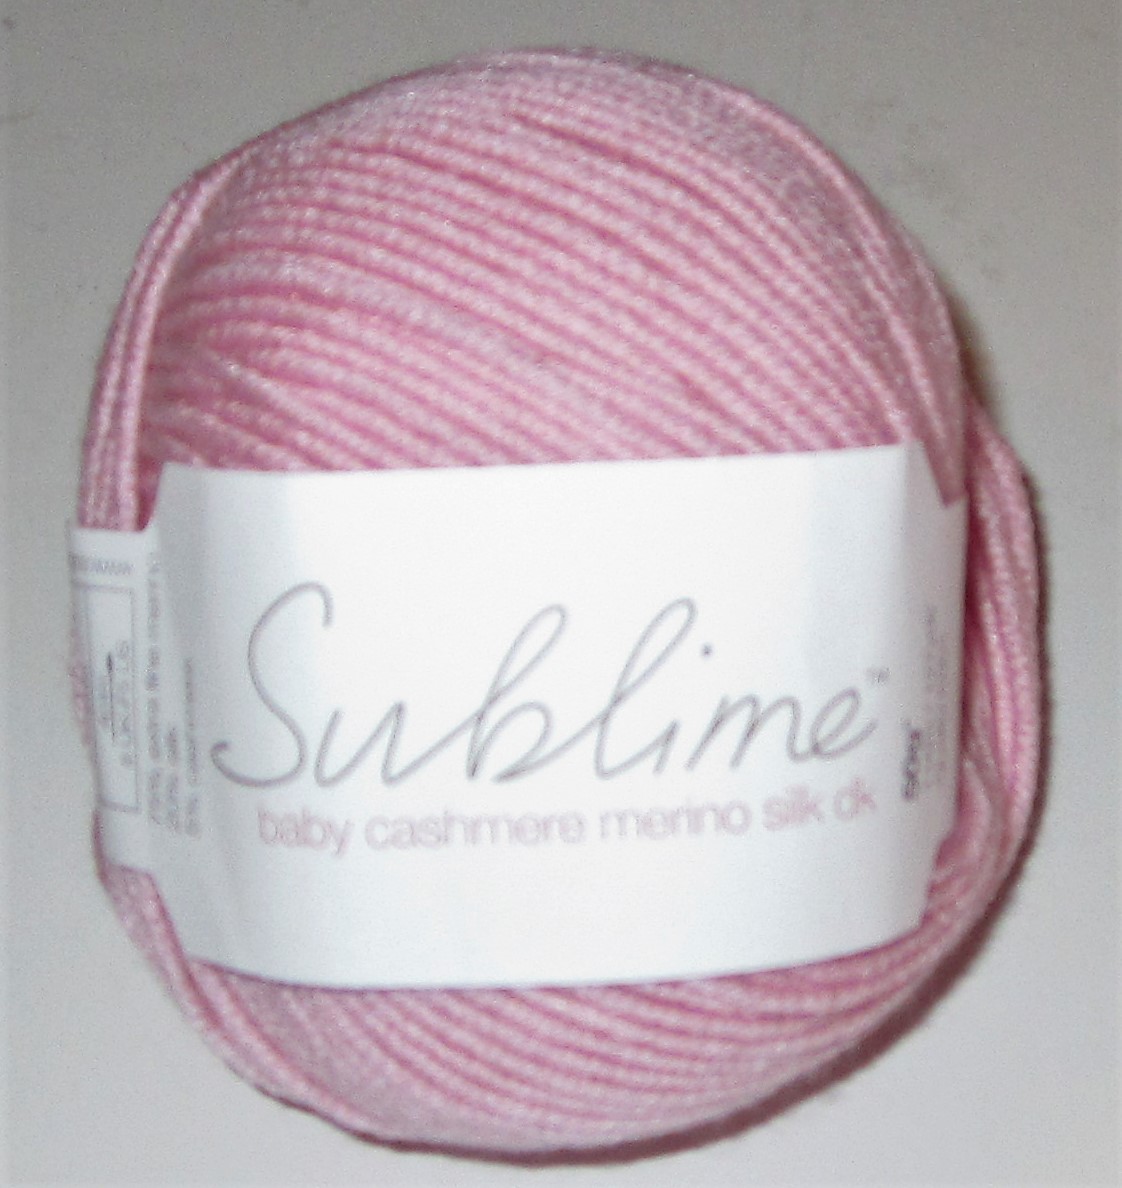 Sublime Baby Cashmere Merino Silk DK 121 Mousse - Click Image to Close